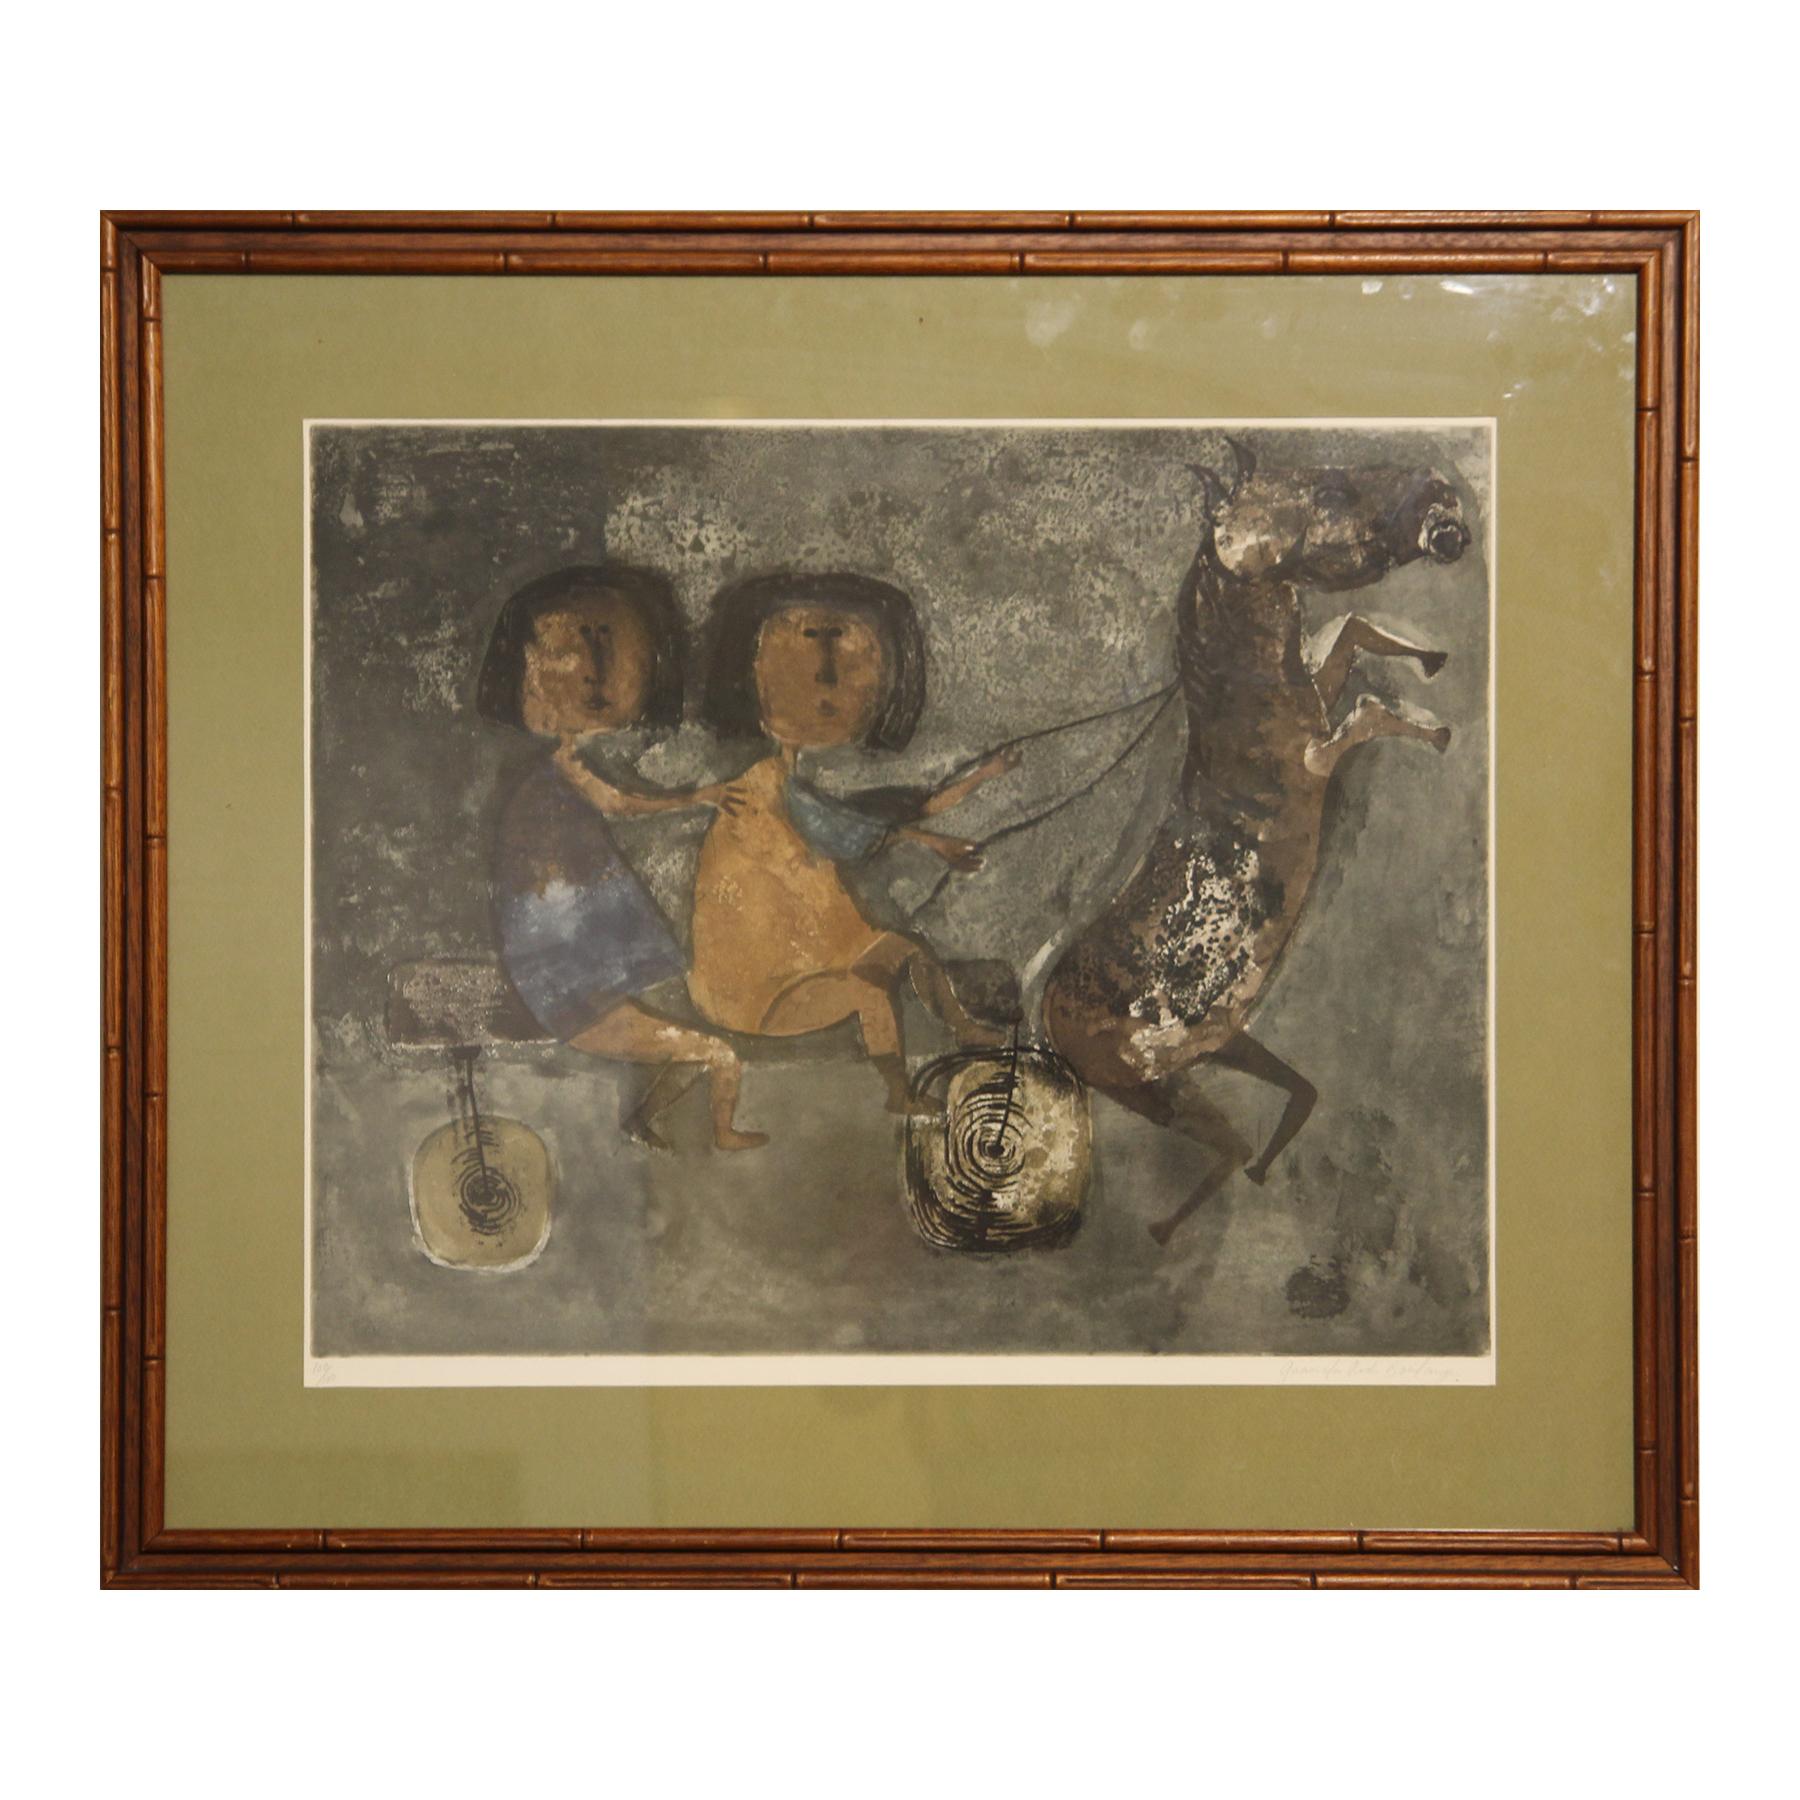 Framed Horse Lithograph - 16 For Sale on 1stDibs